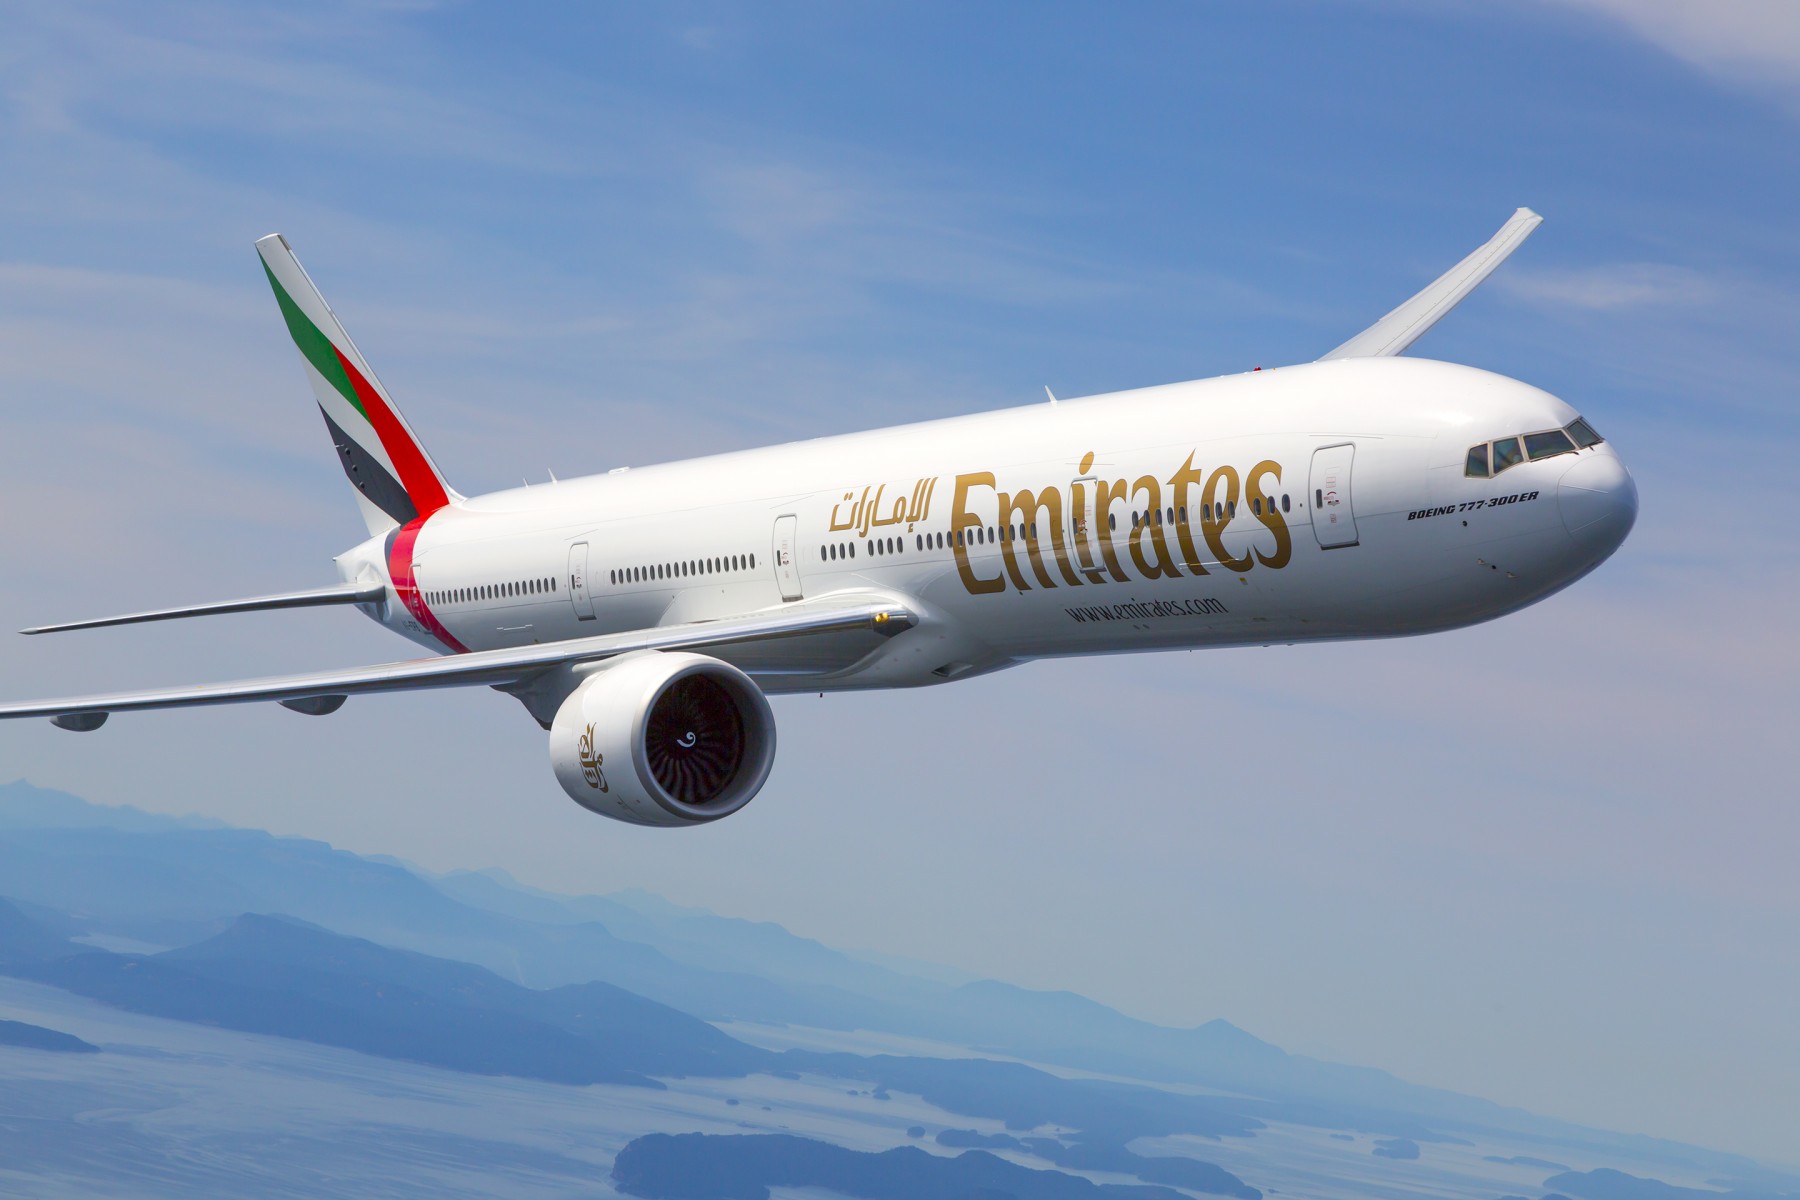 One of World’s Largest Airlines Emirates to Accept Bitcoin as a Payment